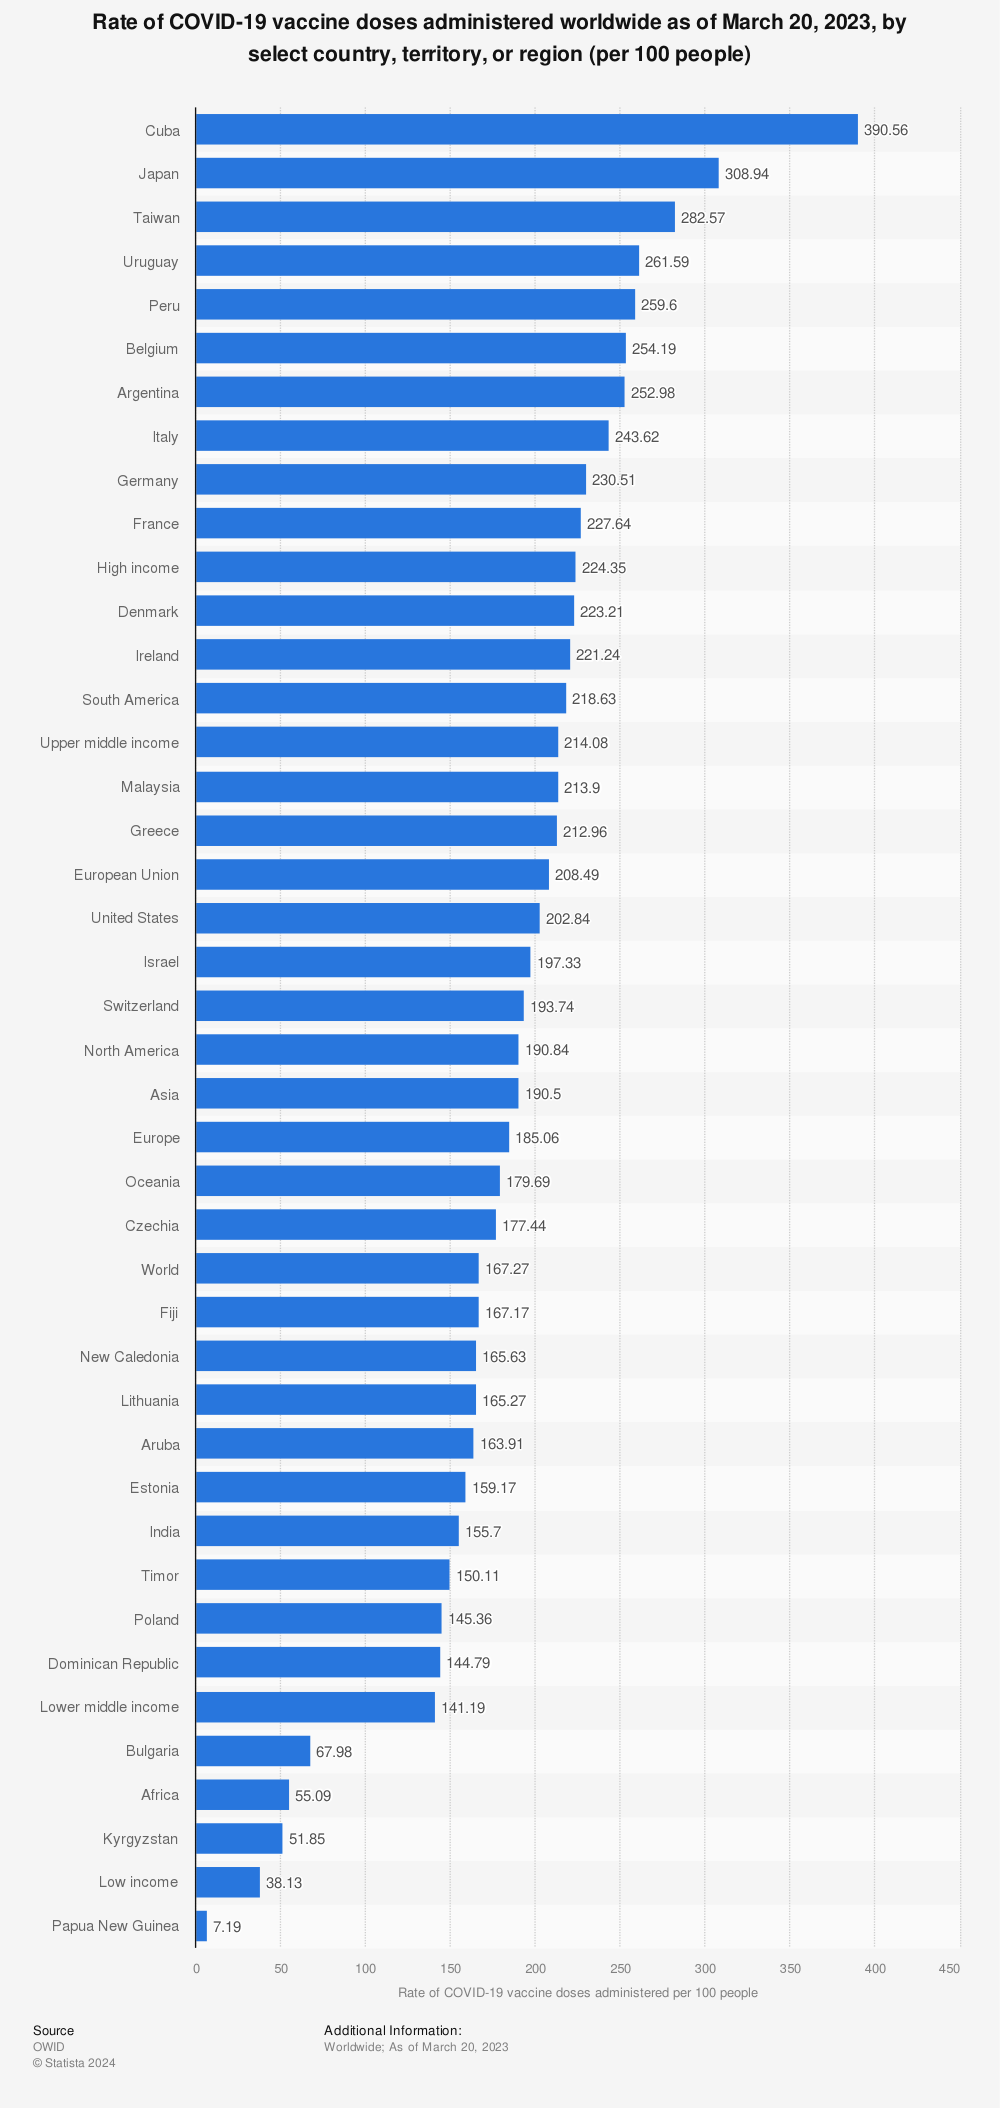 Statistic: Rate of COVID-19 vaccine doses administered worldwide as of January 30, 2023, by select country, territory, or region (per 100 people) | Statista